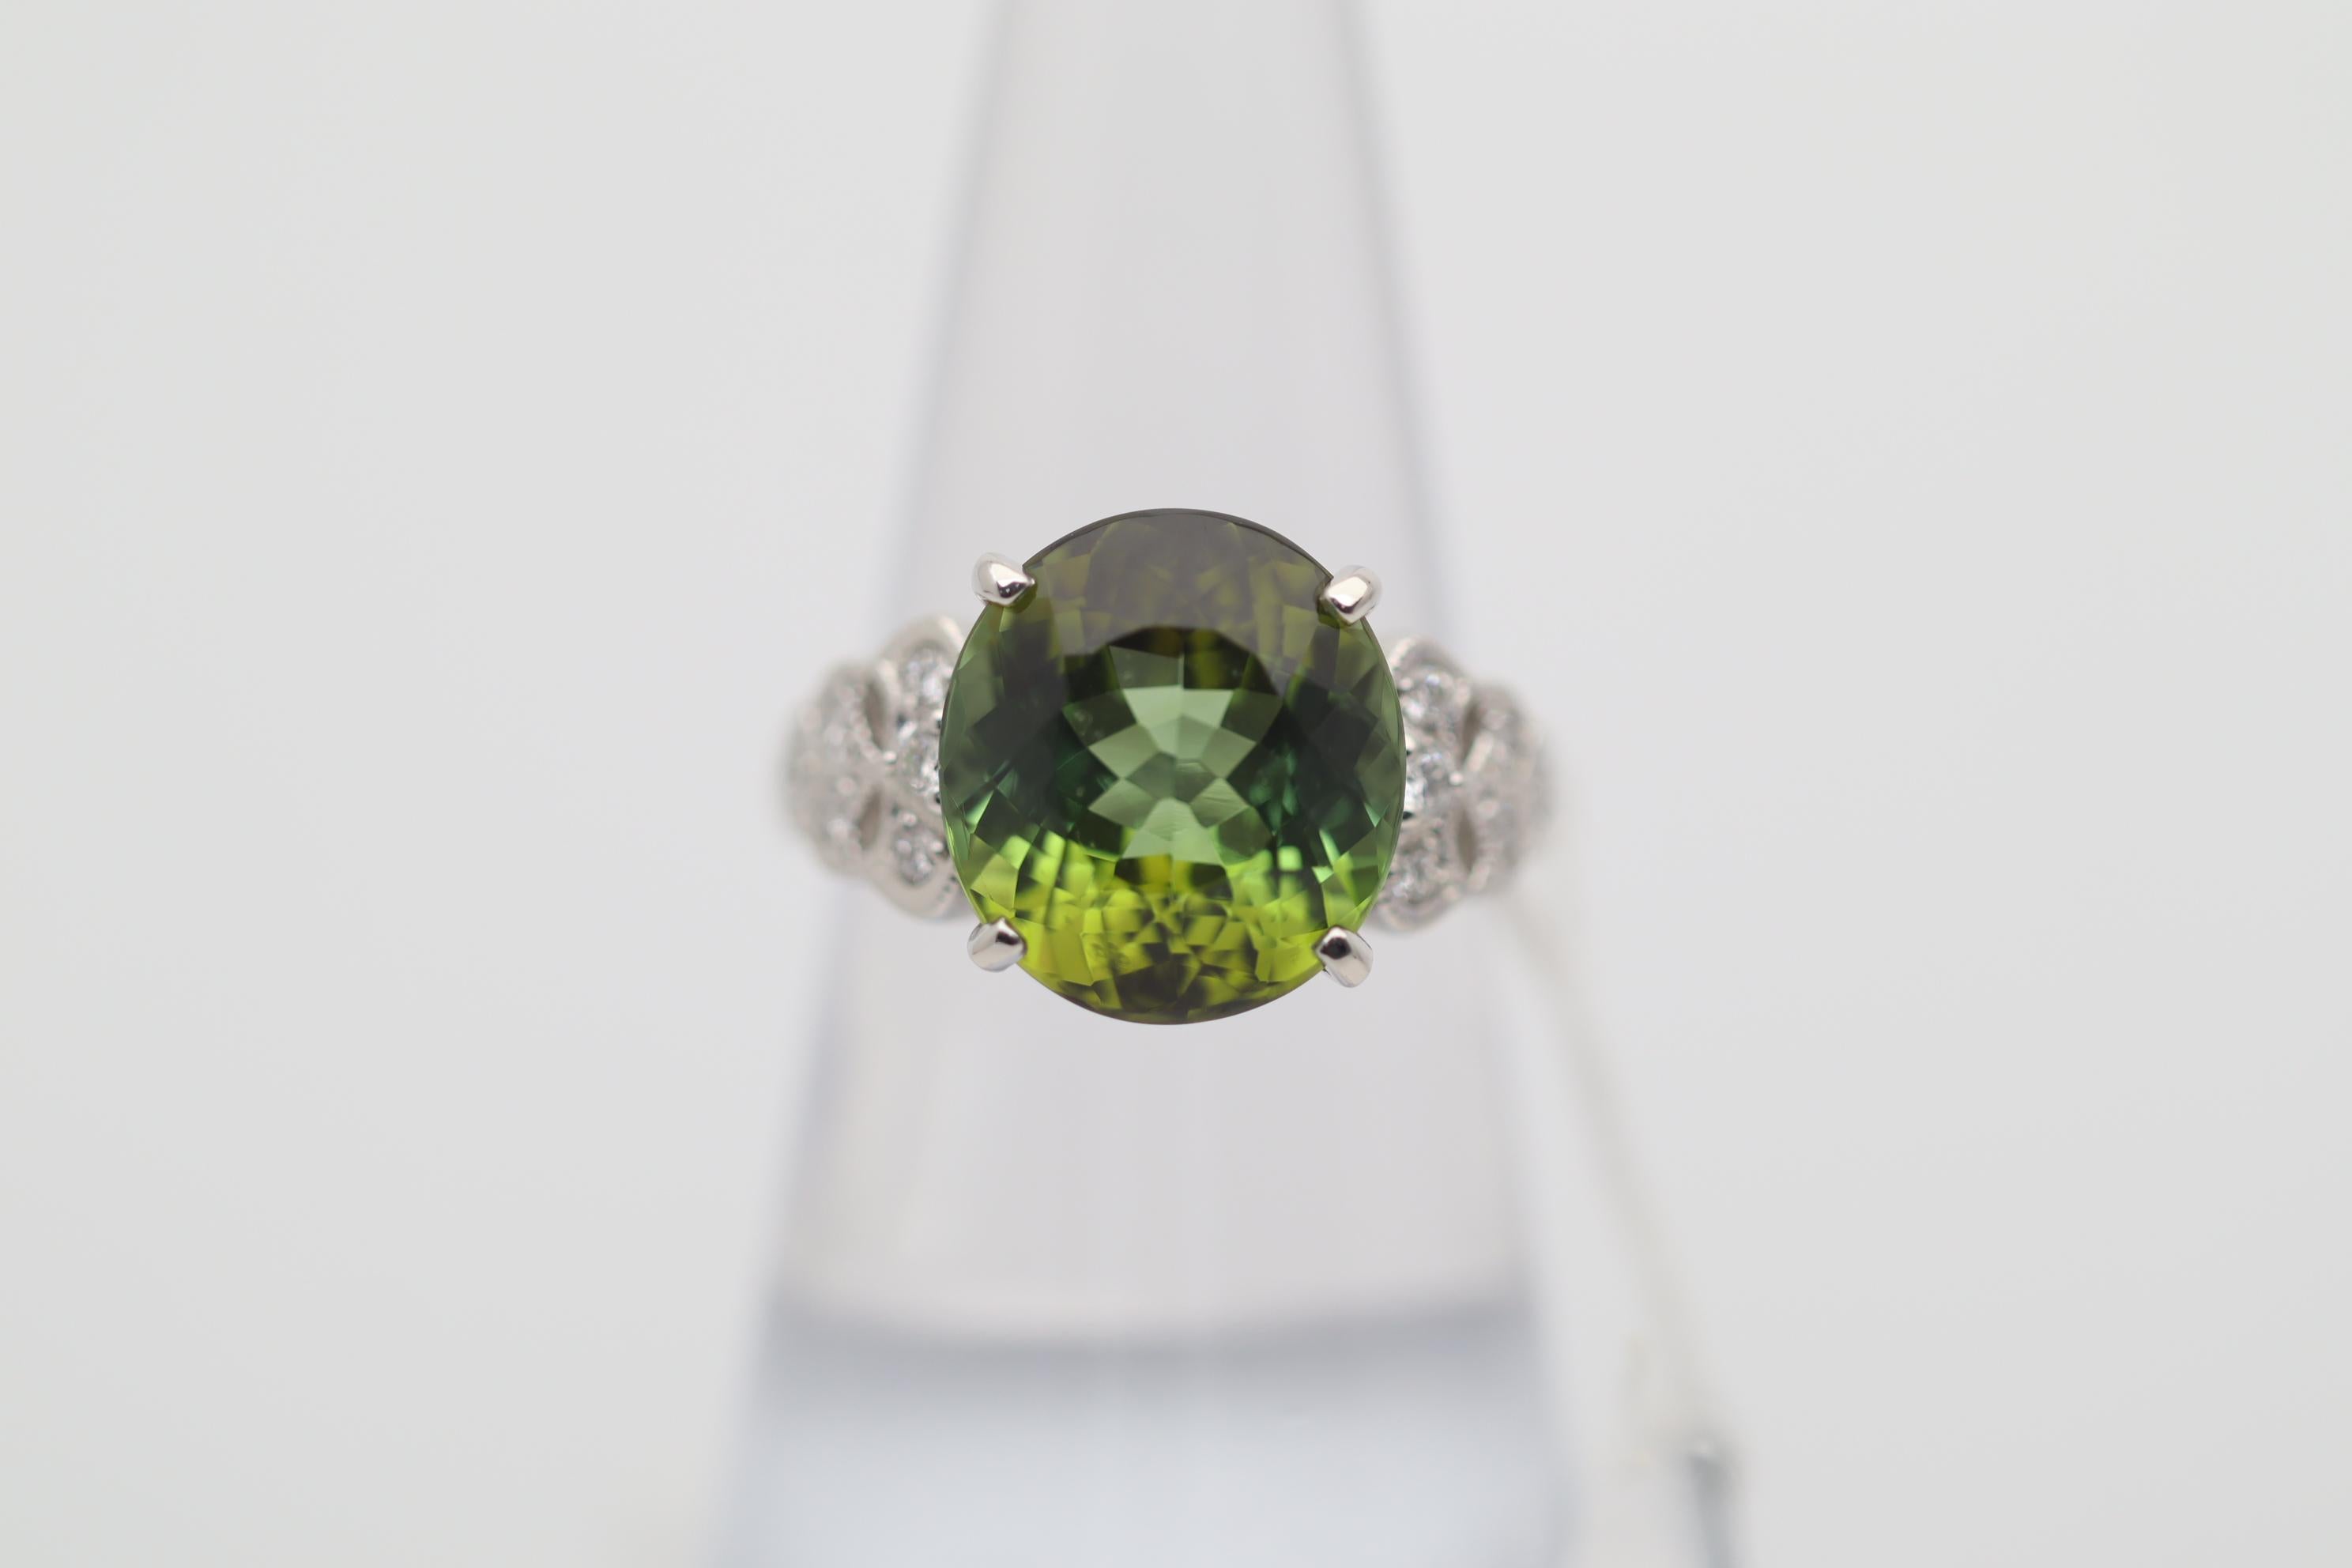 A superb green tourmaline takes center stage of this platinum made ring. It weighs 8.46 carats and has a brilliant, lively, and rich lime green color. It is accented by 0.22 carats of round brilliant-cut diamonds set on the sides of the ring.